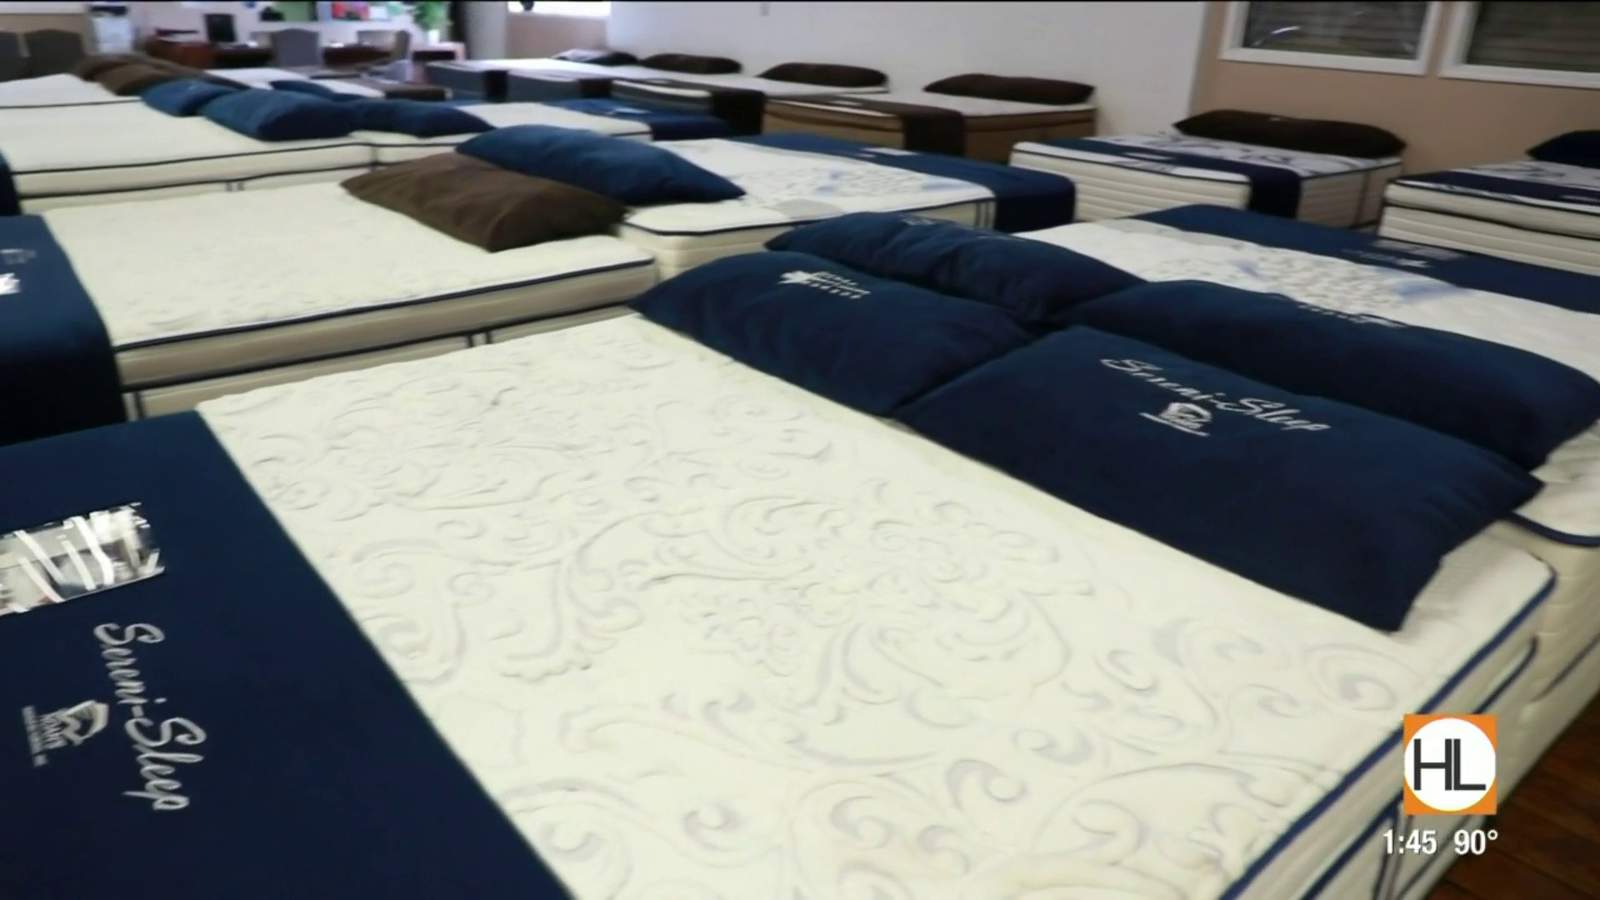 Shop local: Get a mattress made in Houston